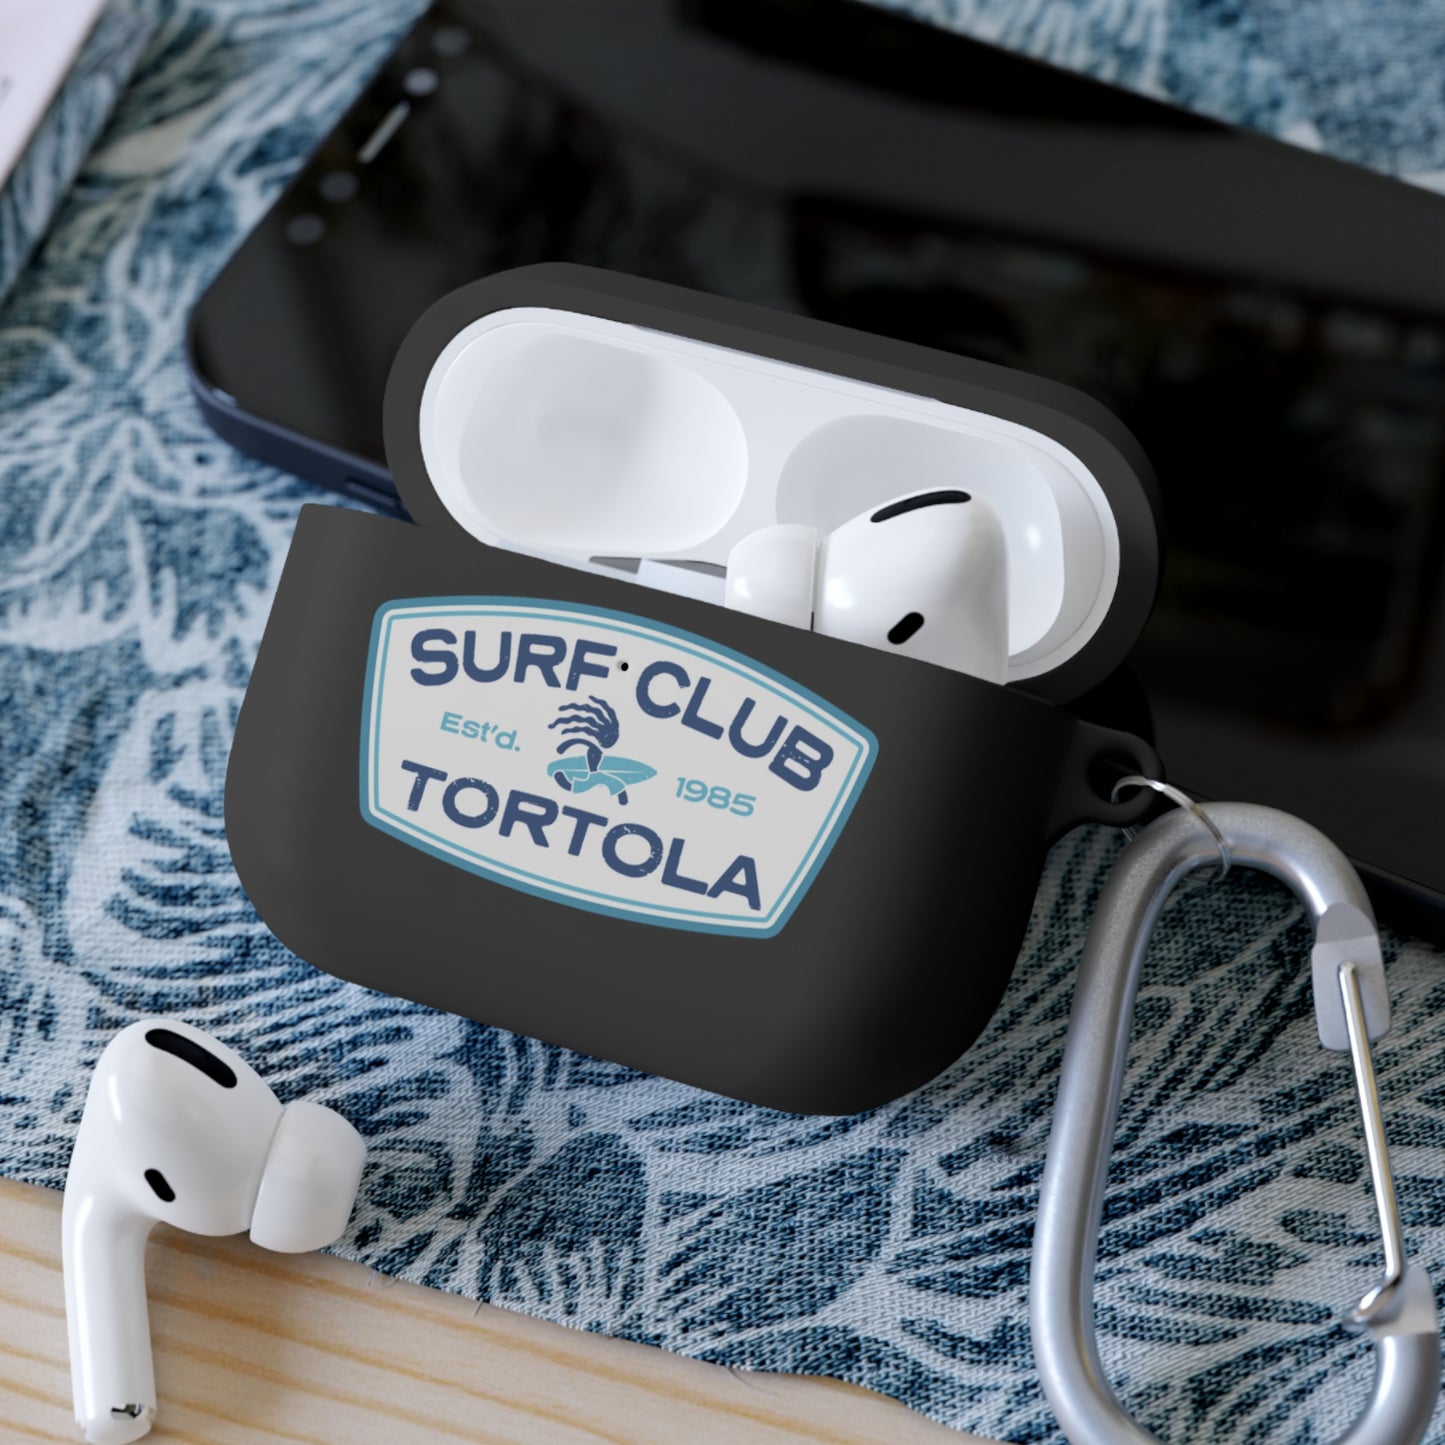 "Surf Club Tortola” AirPods and AirPods Pro Case Cover